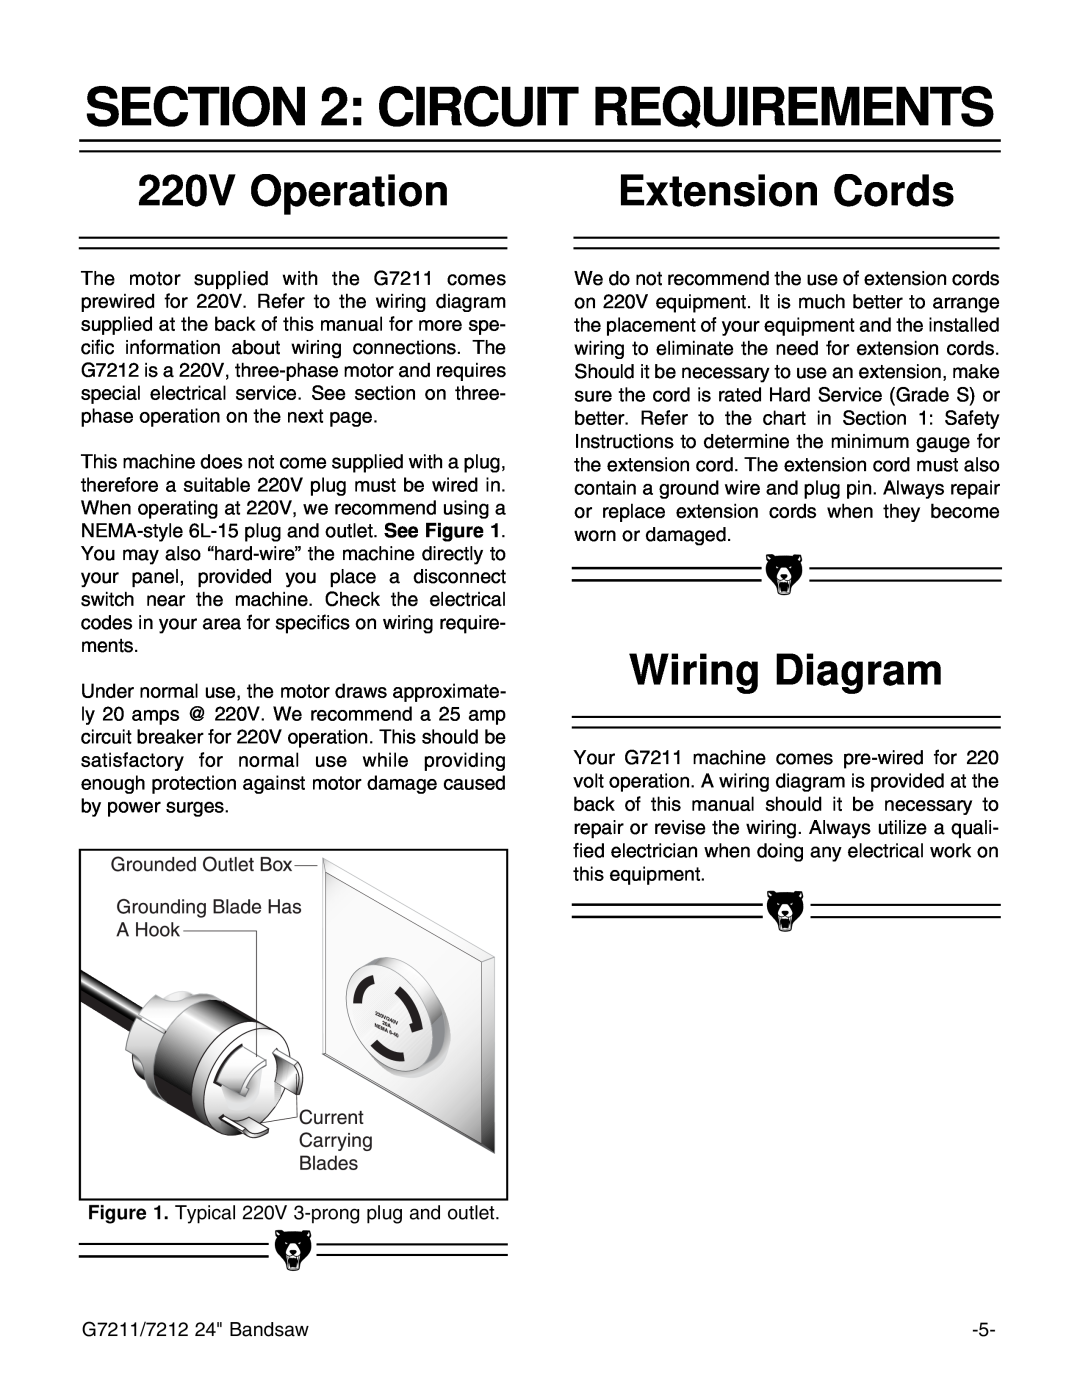 Grizzly G7211, G7212 instruction manual Circuit Requirements, 220V Operation, Extension Cords, Wiring Diagram 